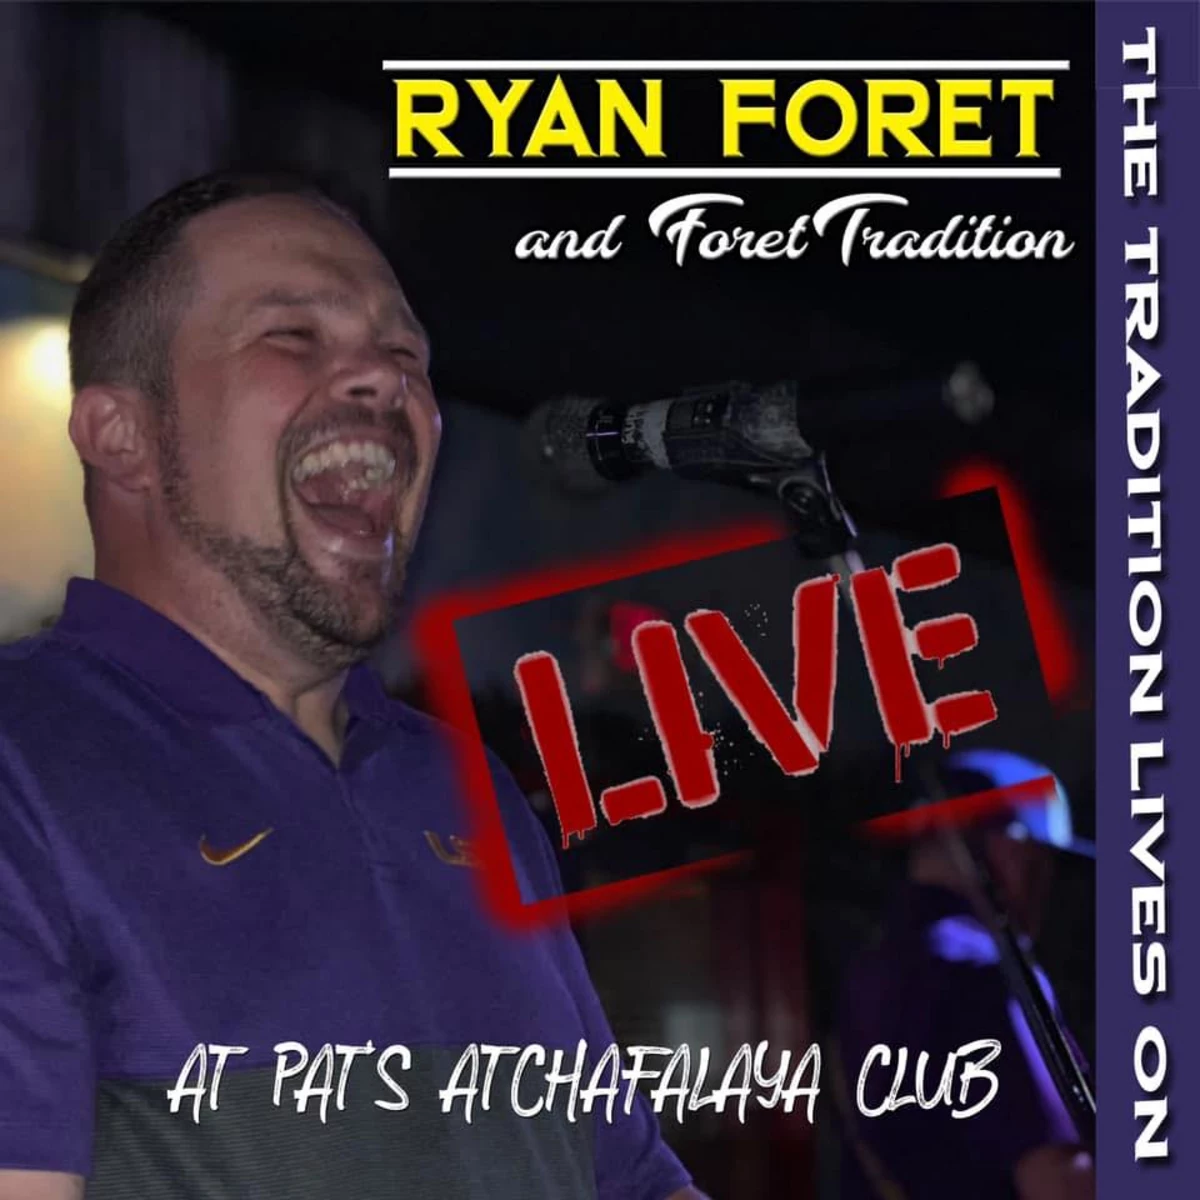 Ryan Foret and Foret Tradition Announce New Album Release